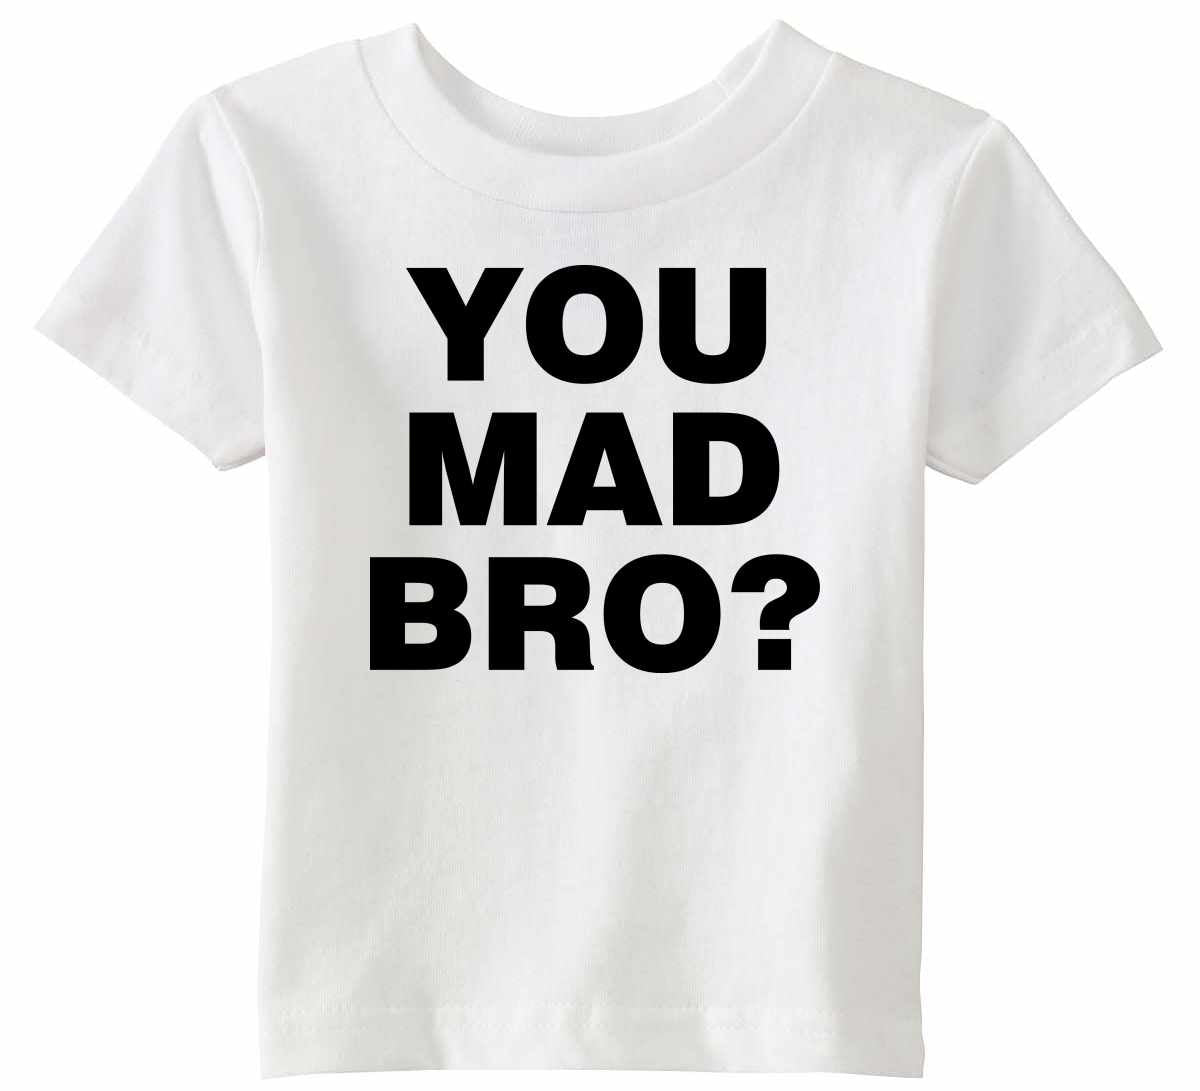 YOU MAD BRO? Infant/Toddler  (#826-7)